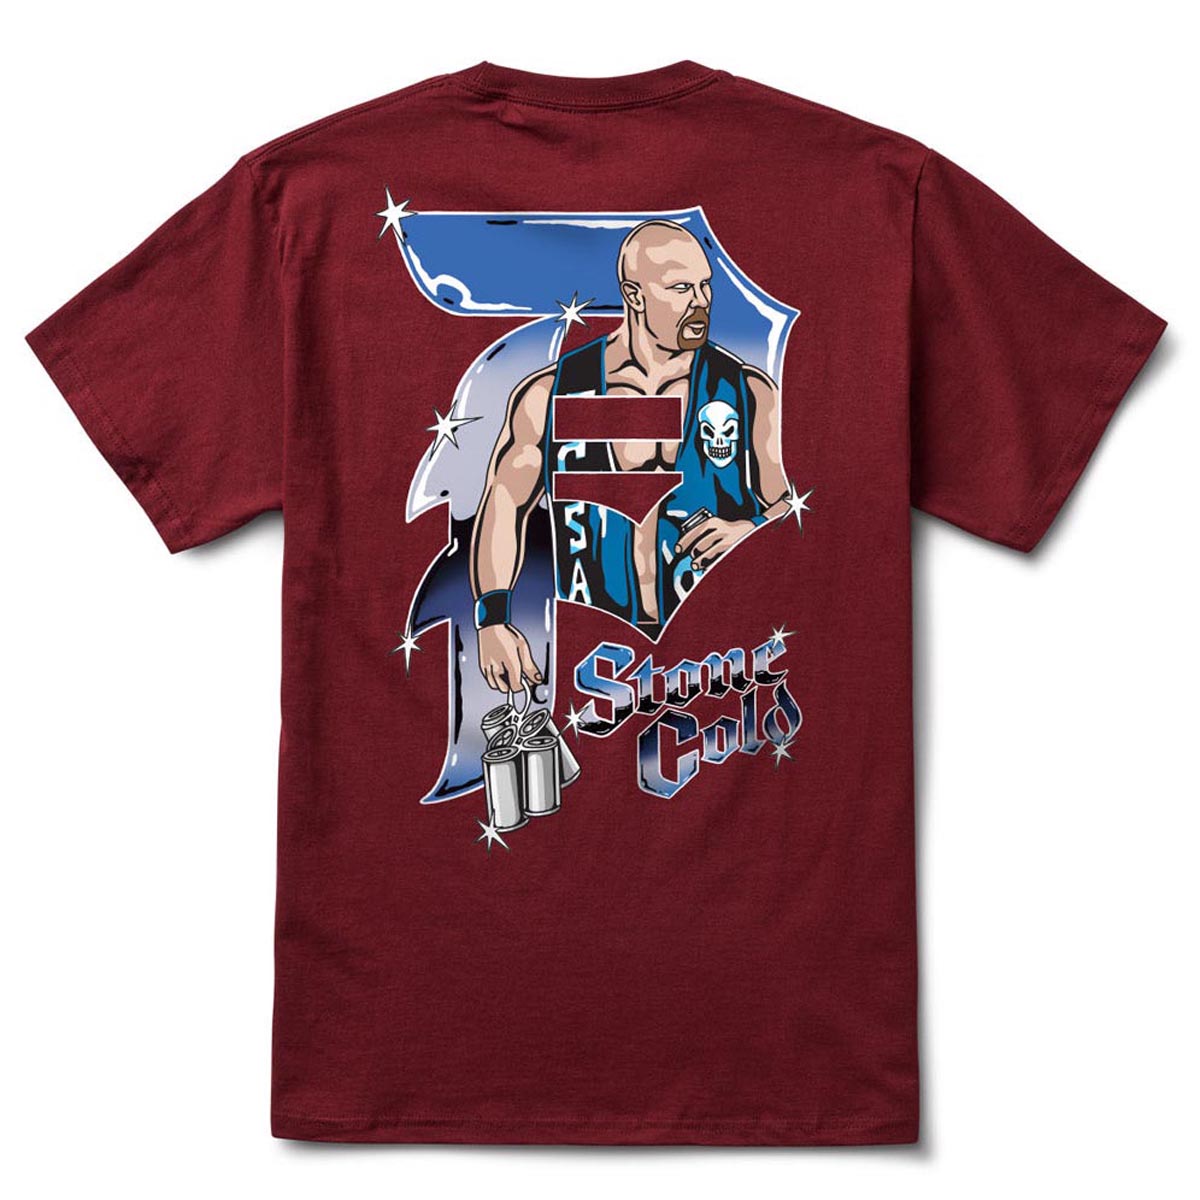 Primitive x WWE Cold One T-Shirt - Burgundy image 1